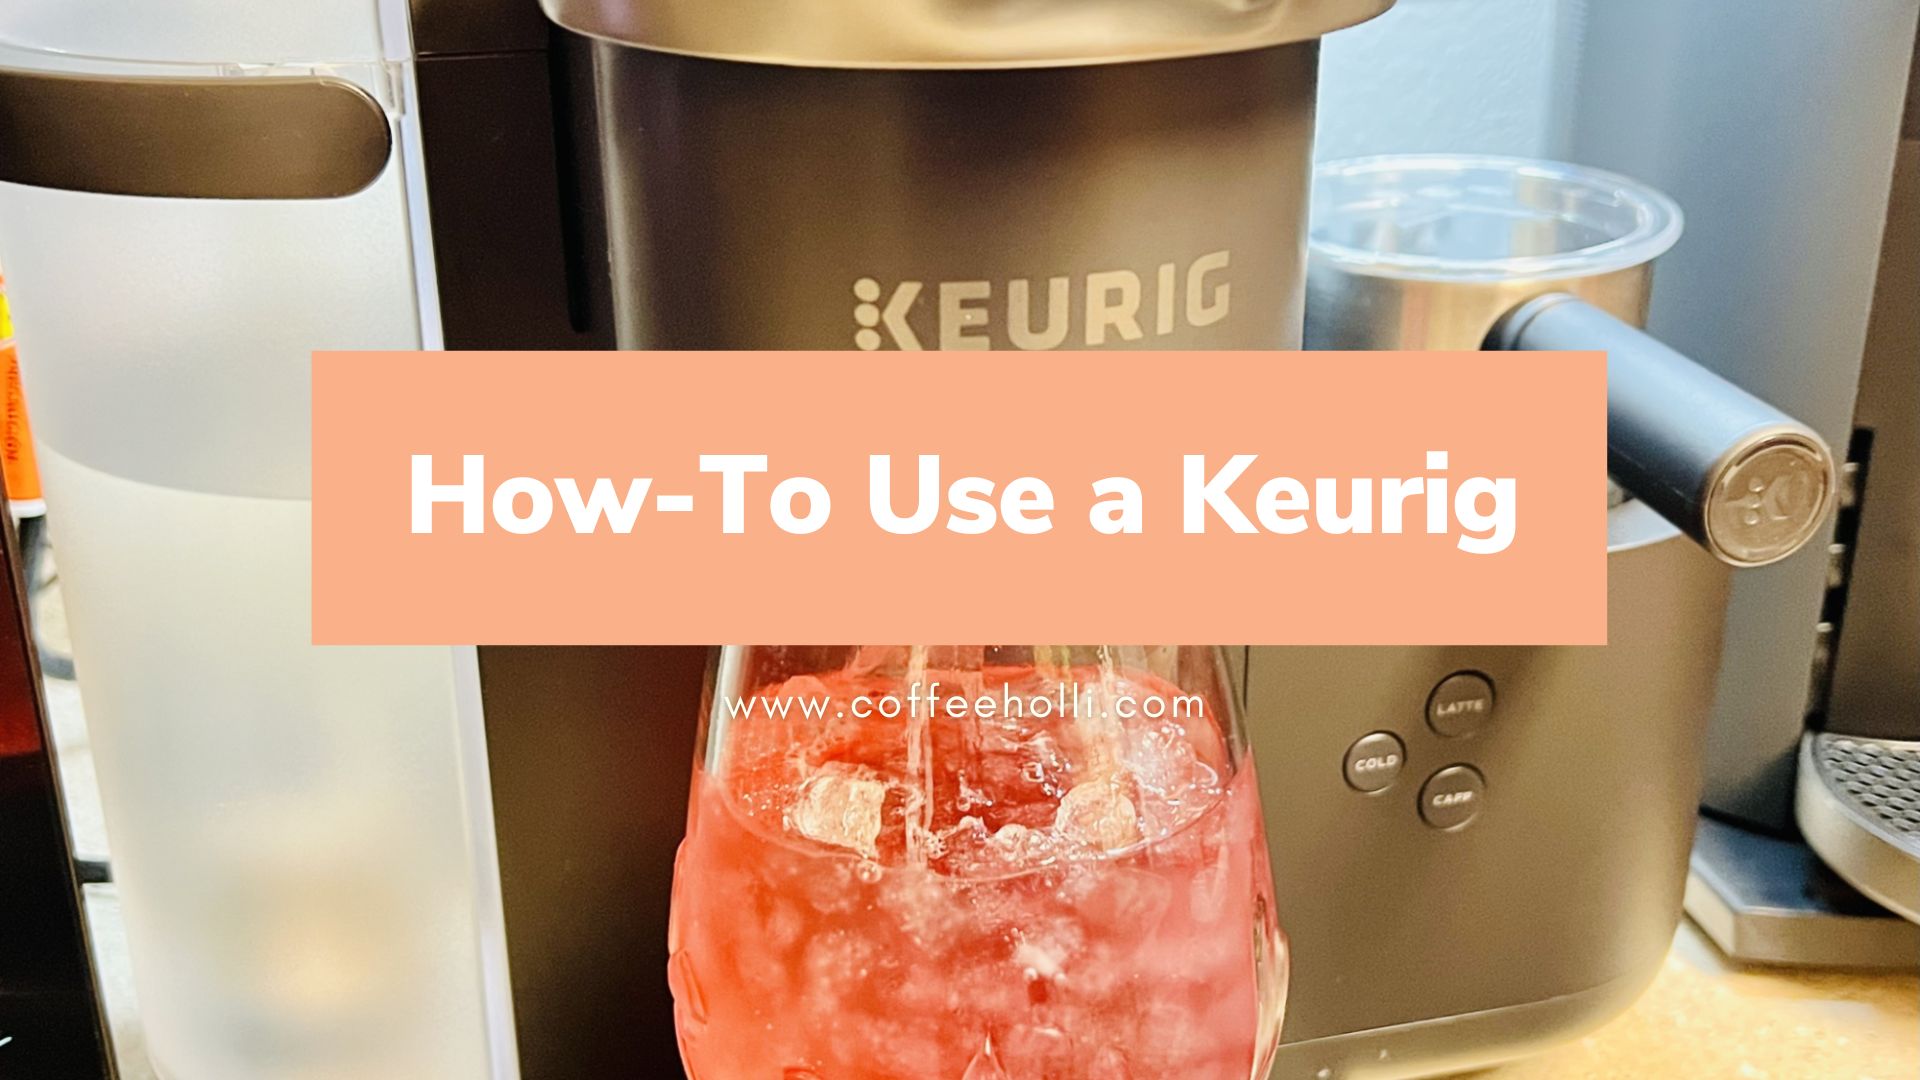 How-To Use a Keurig